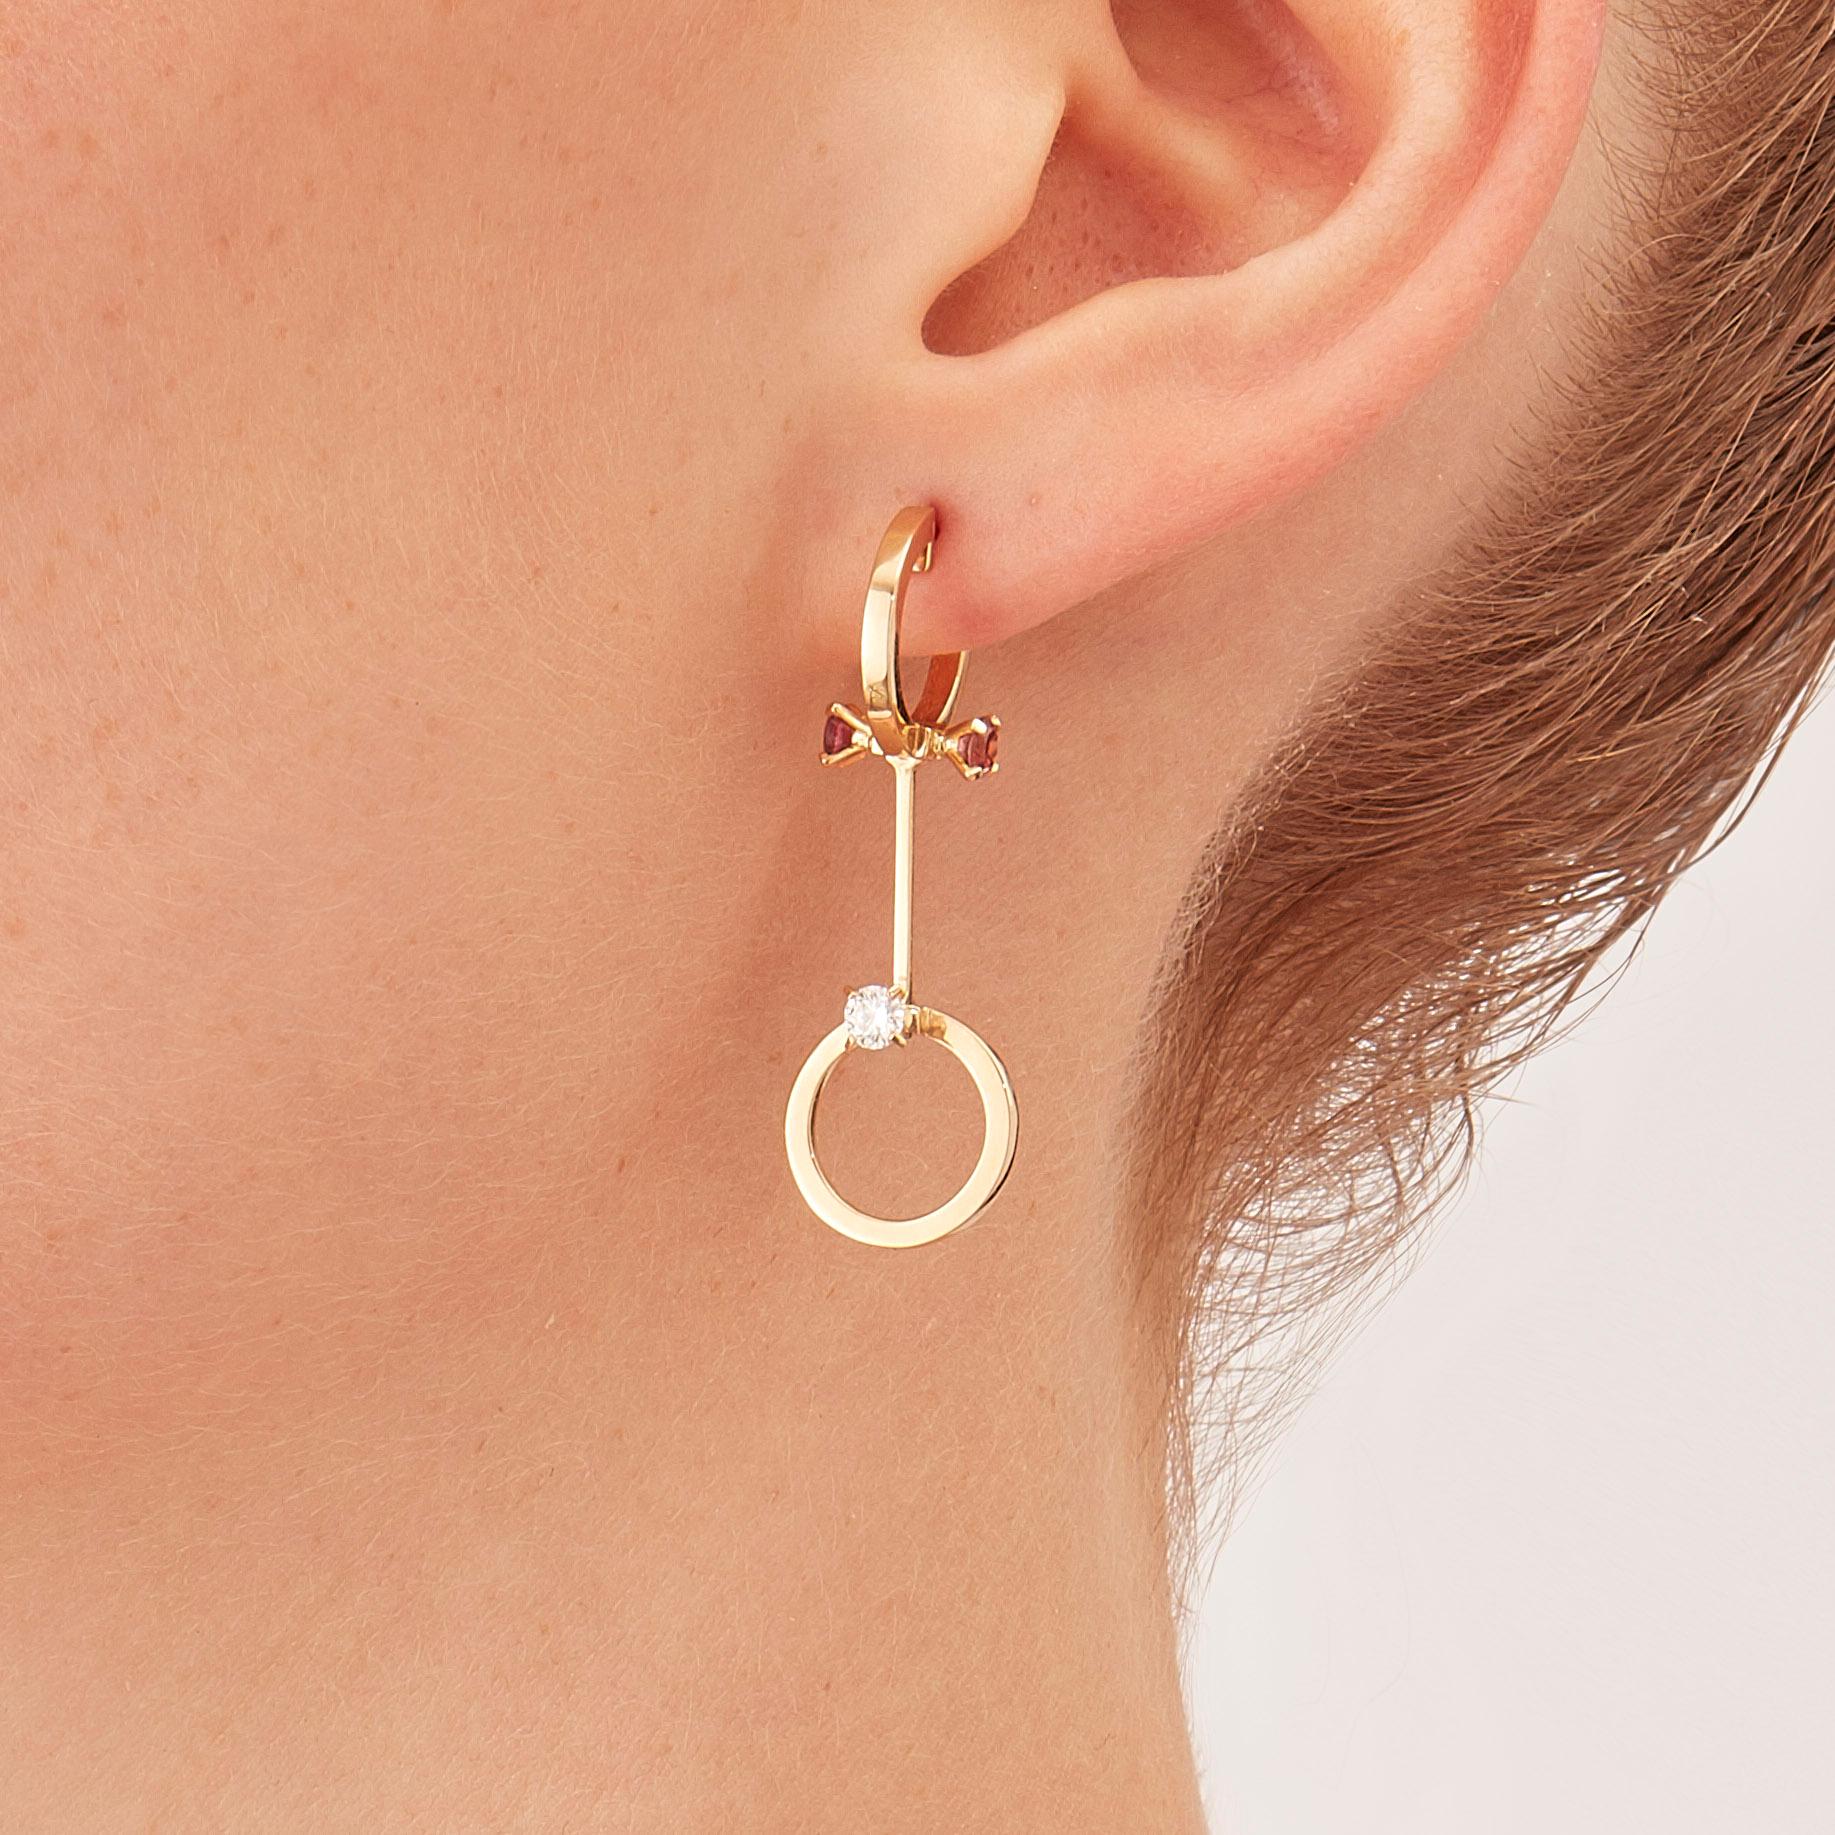 Made by hand in the Milanese atelier of Nathalie Jean, the limited edition Hoi An earrings are a graceful composition of articulated rings and bars in rosé gold, a warm, sophisticated color close to yellow gold. Miniature articulations are cleverly